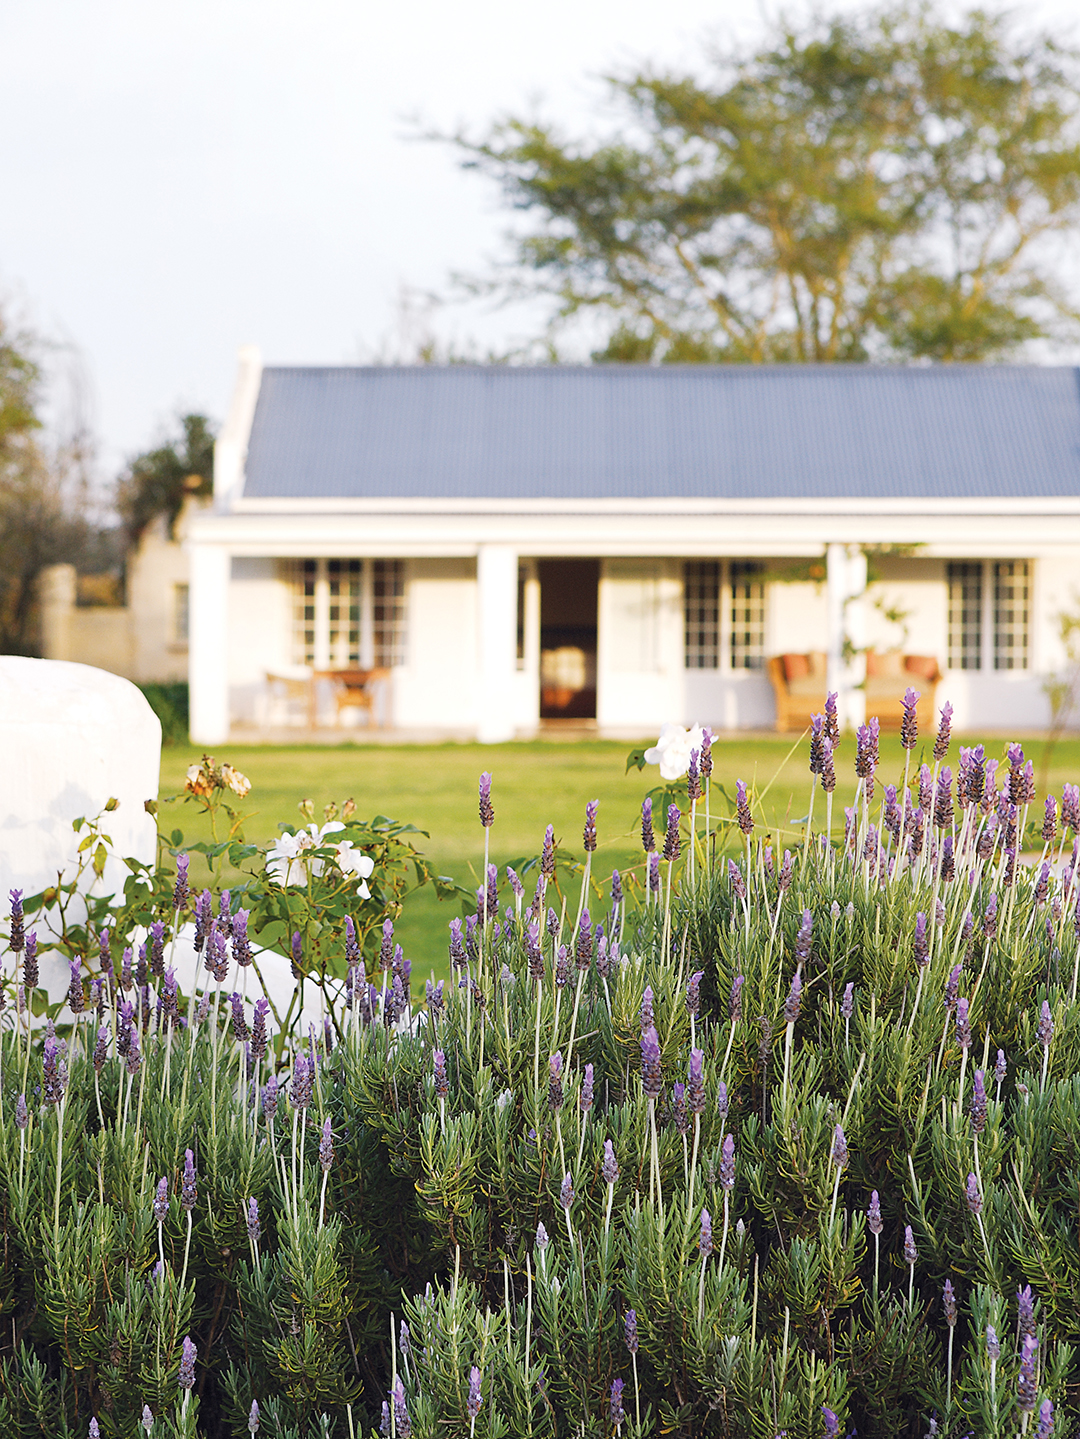 One of the Stables Cottages seen over a bed of lavender.